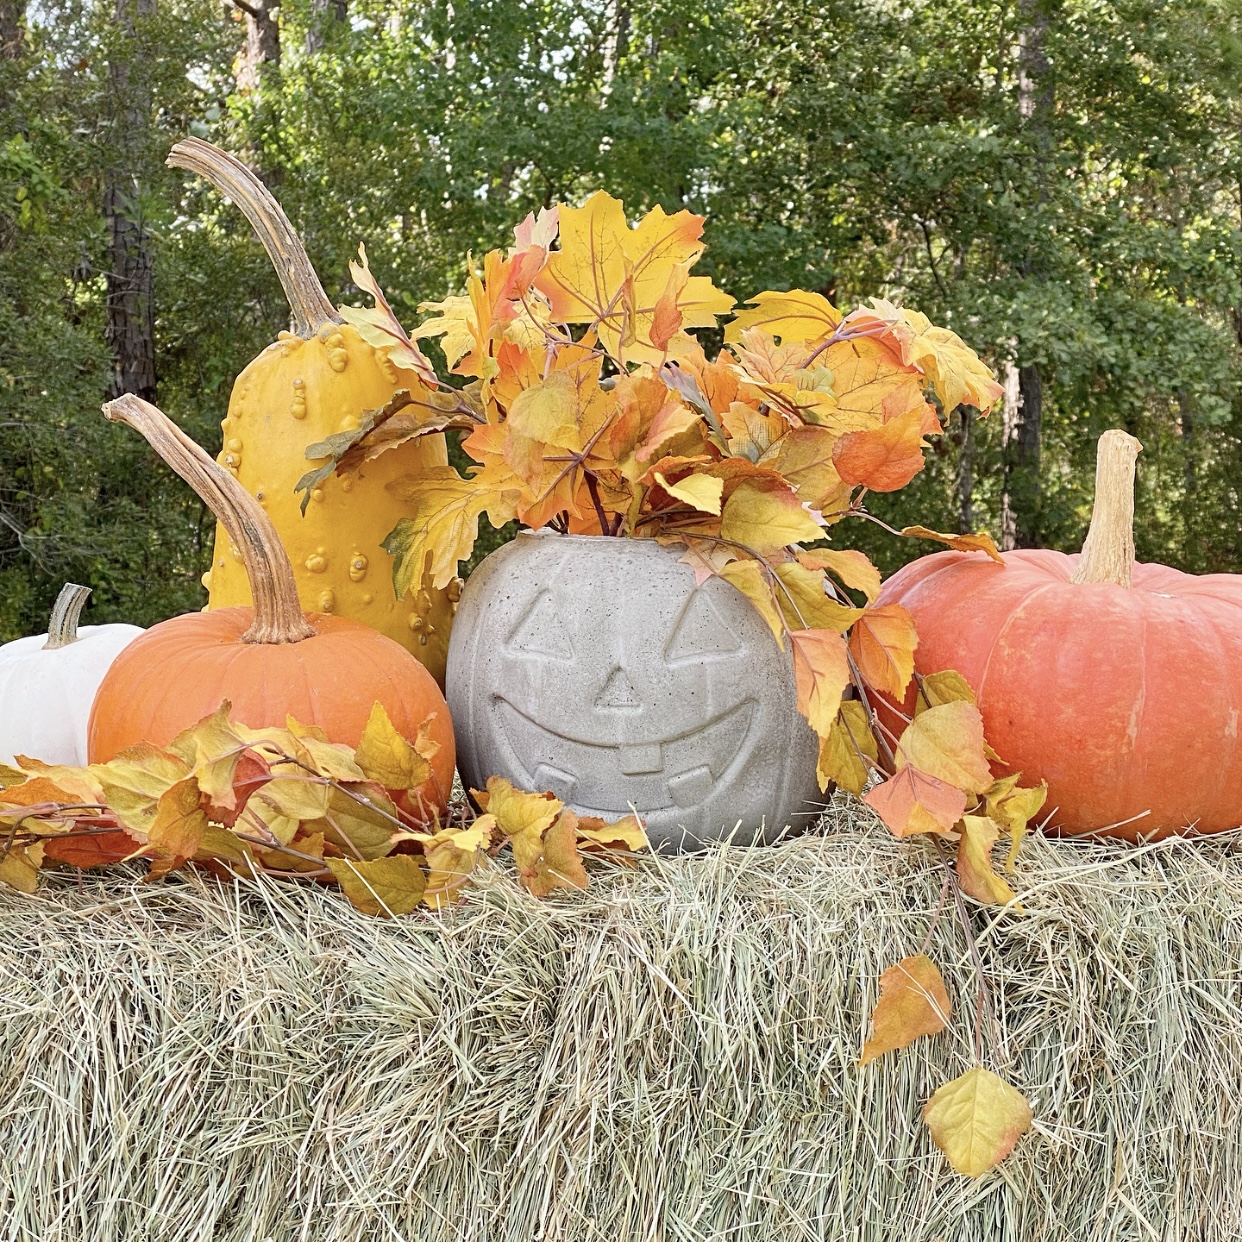 Concrete jack o'lantern on a bale of hay with pumpkins and fall leaves in and around it.